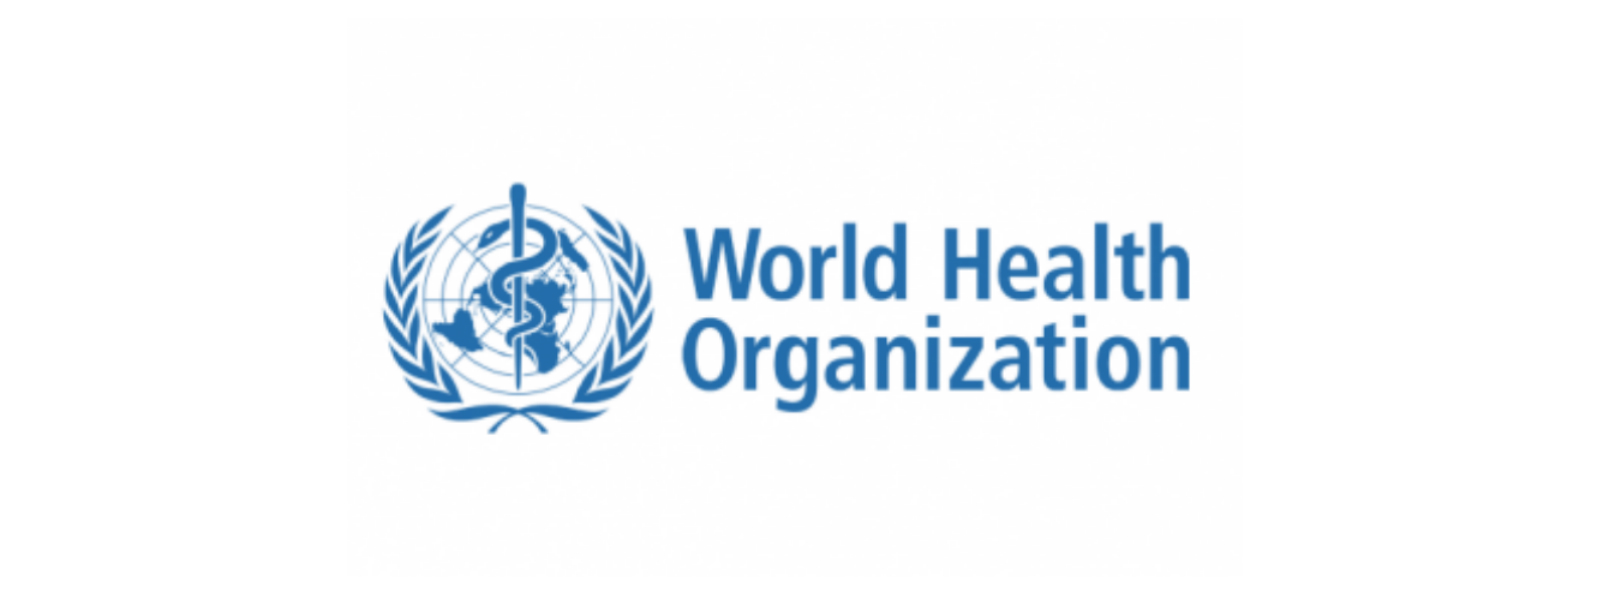 WHO guidelines for COVID-19 inoculation program 